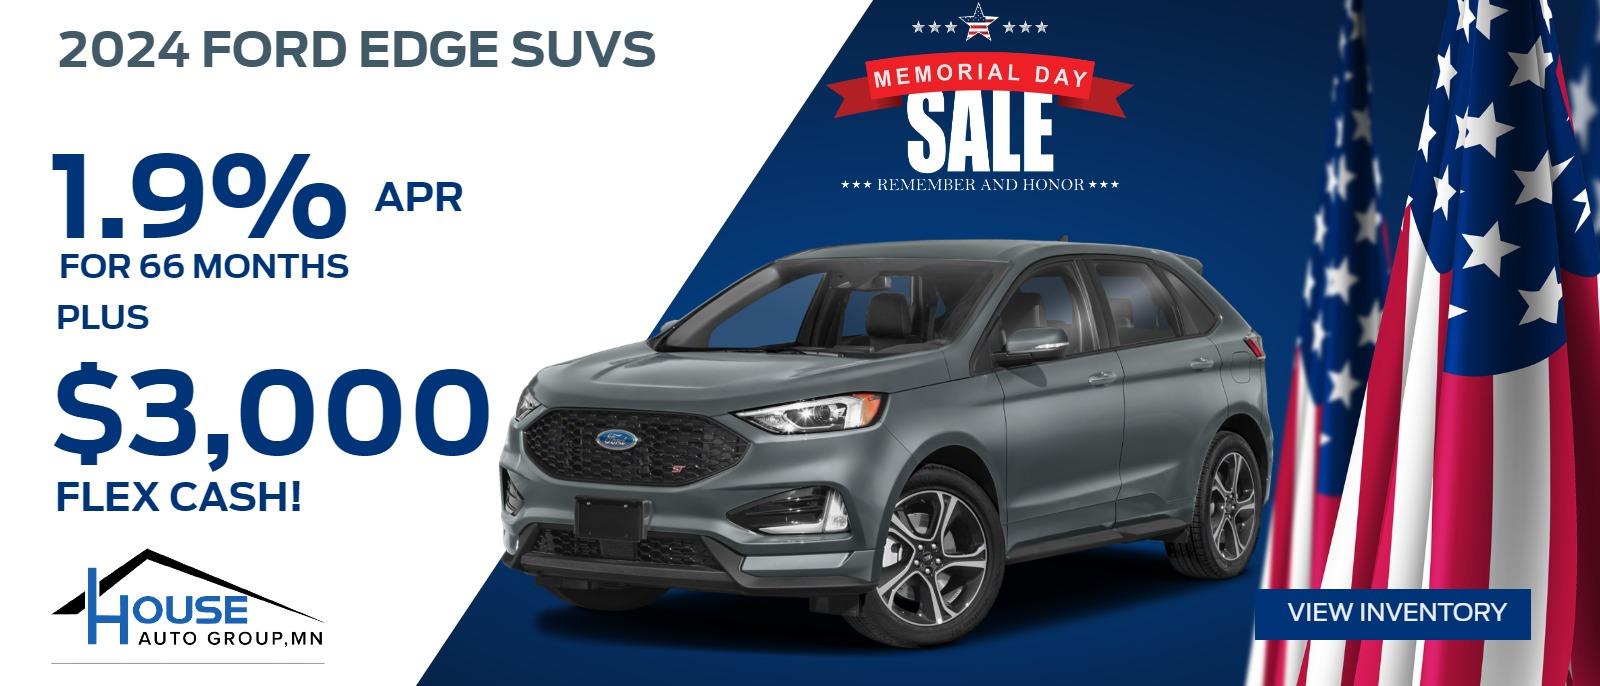 2024 Ford Edge SUVs -- 1.9% APR / 66 Months + $3,000 Flex Cash! (for qualified buyers financing with Ford Credit, exp. 6/03)